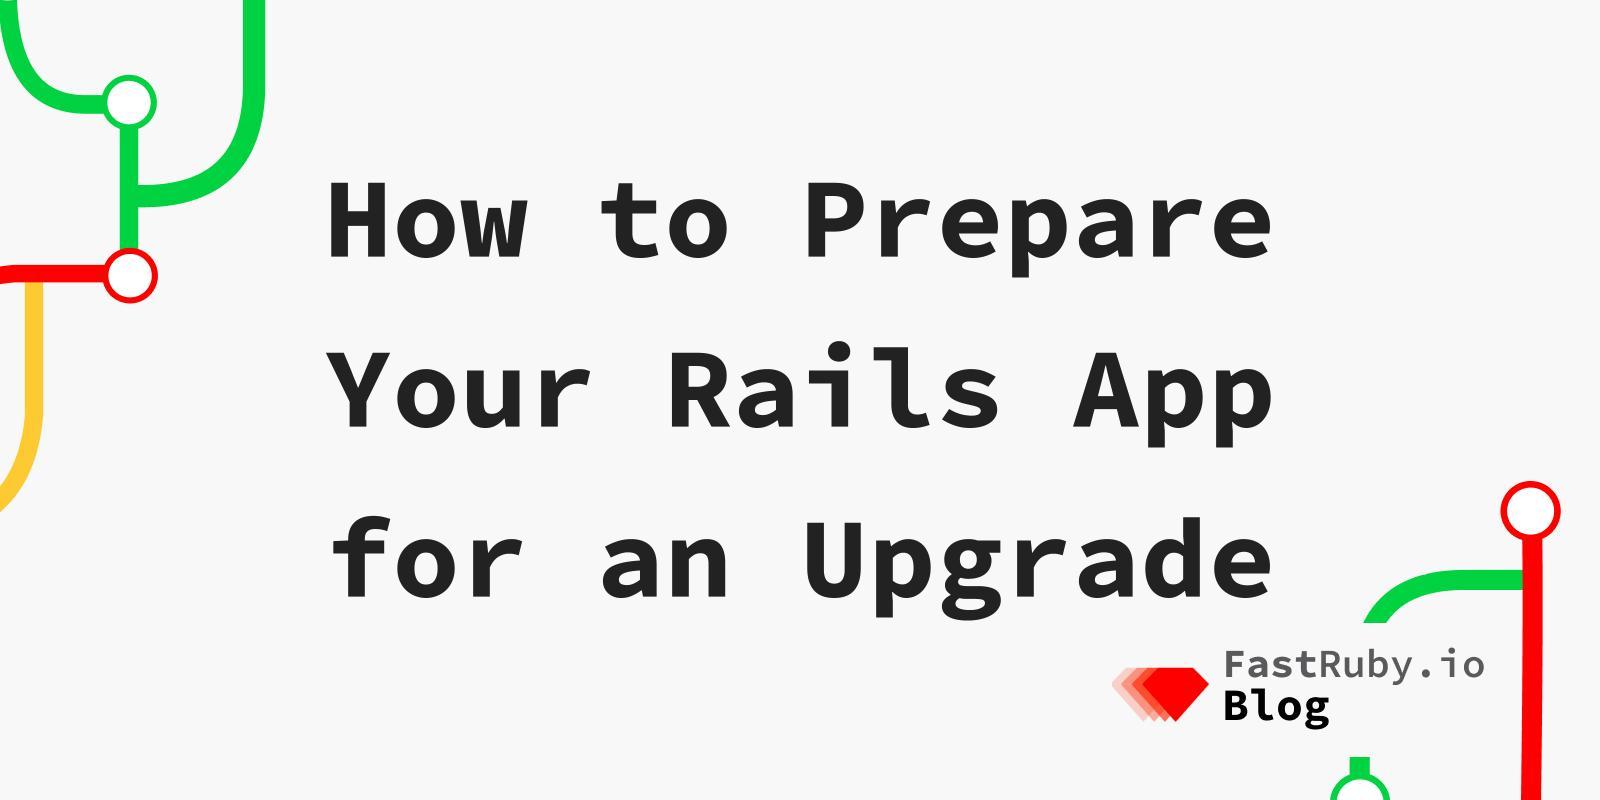 How to Prepare Your Rails App for an Upgrade